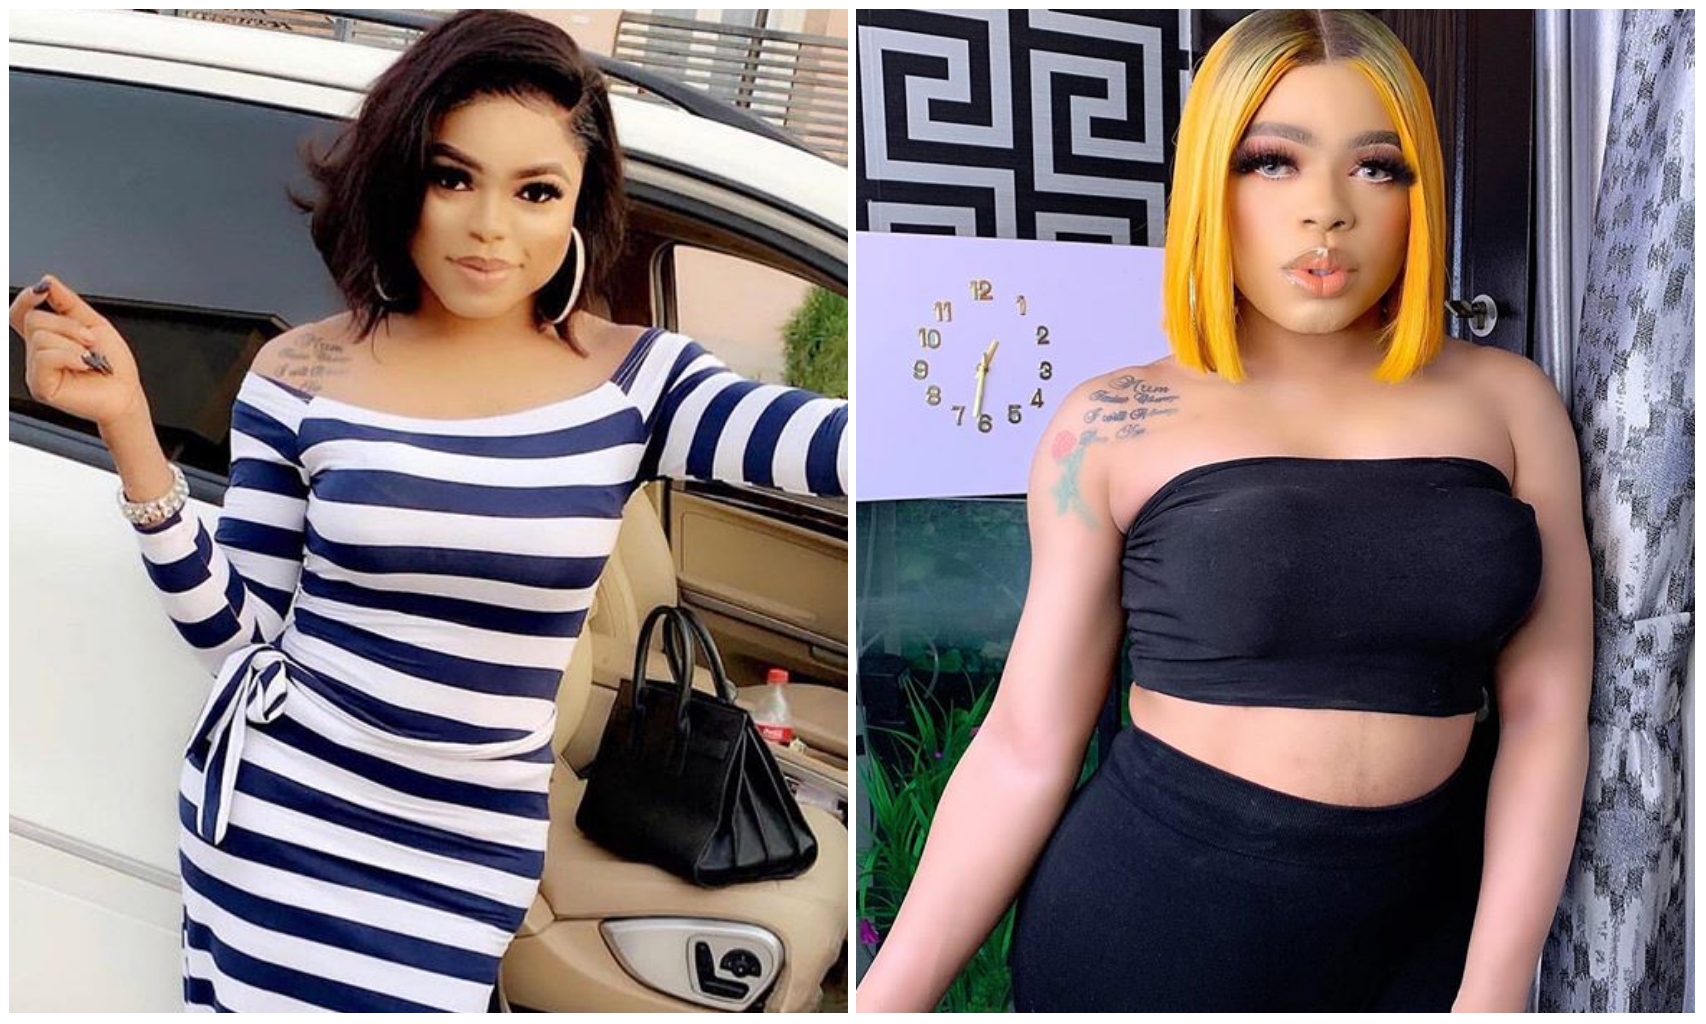 “My body is meant for only billionaires” – Bobrisky declares